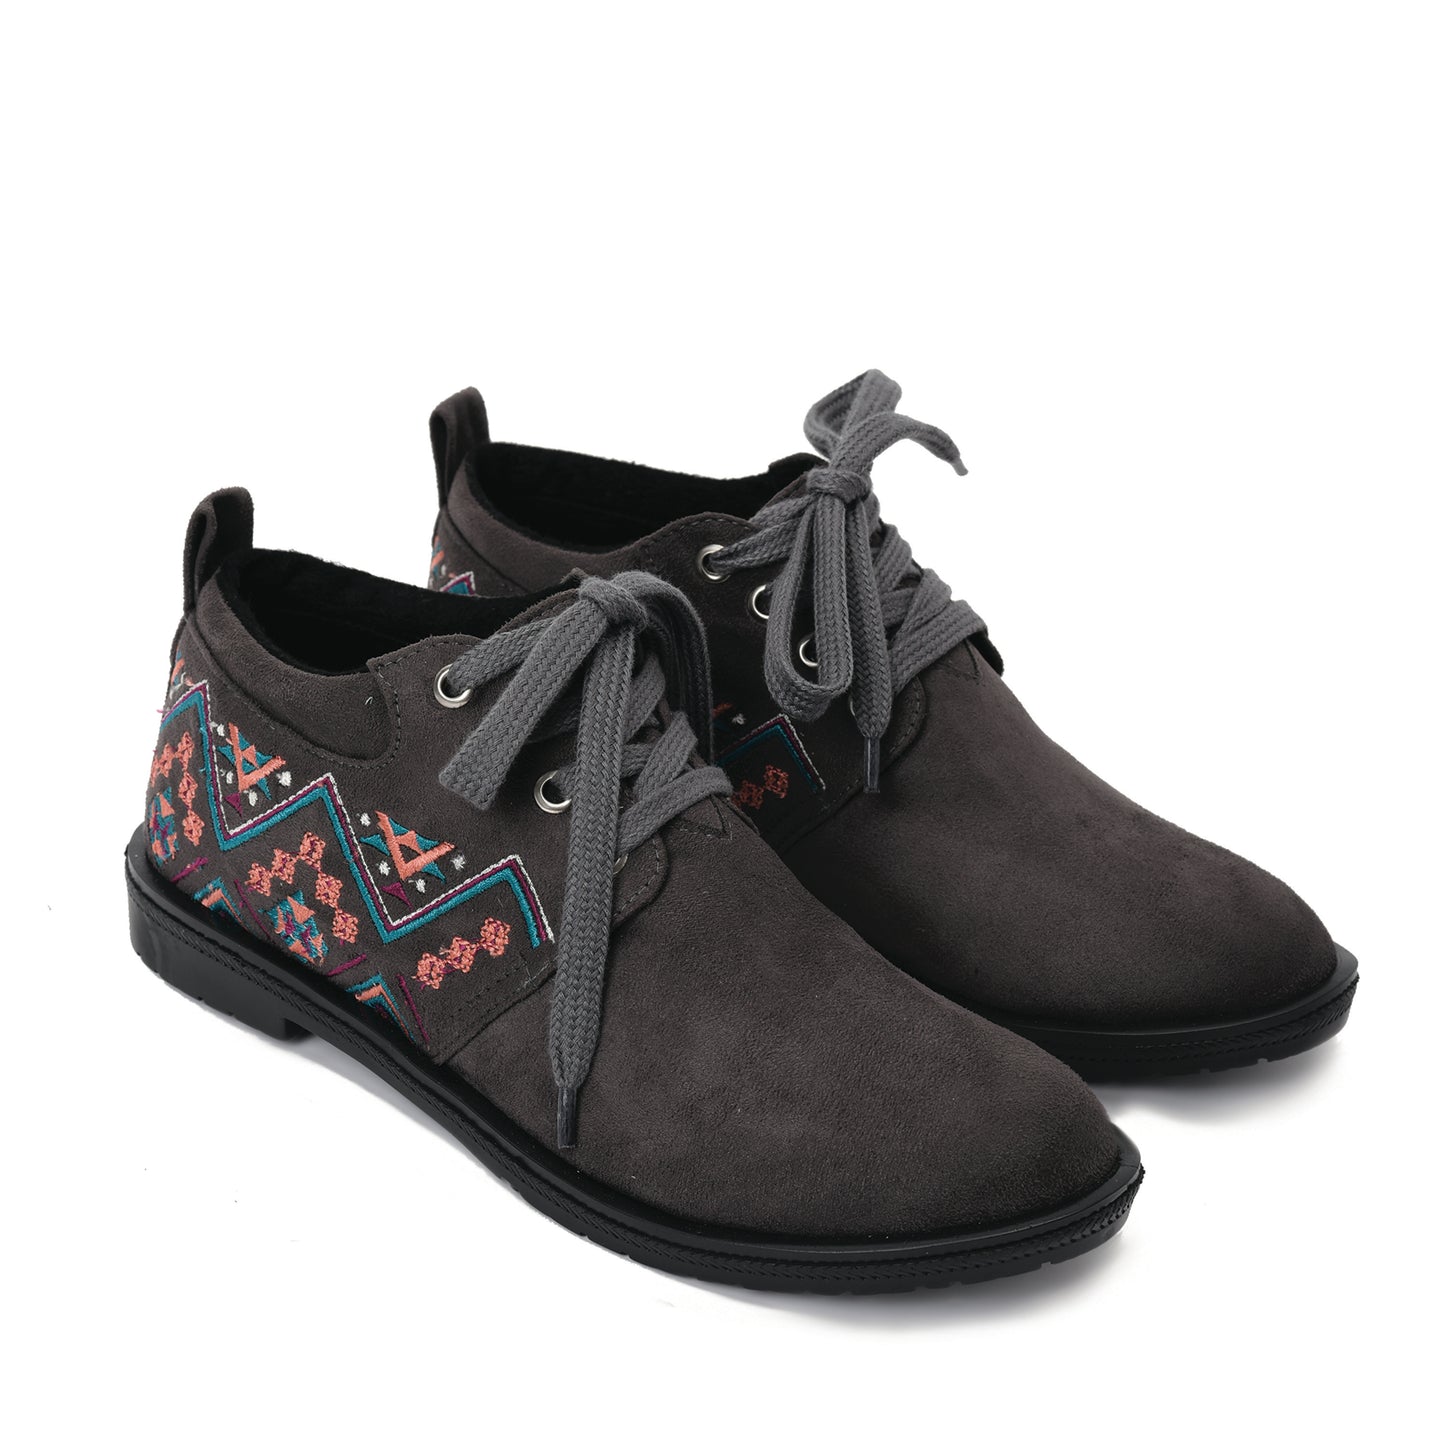 Grey Folk embroidered low neck boots